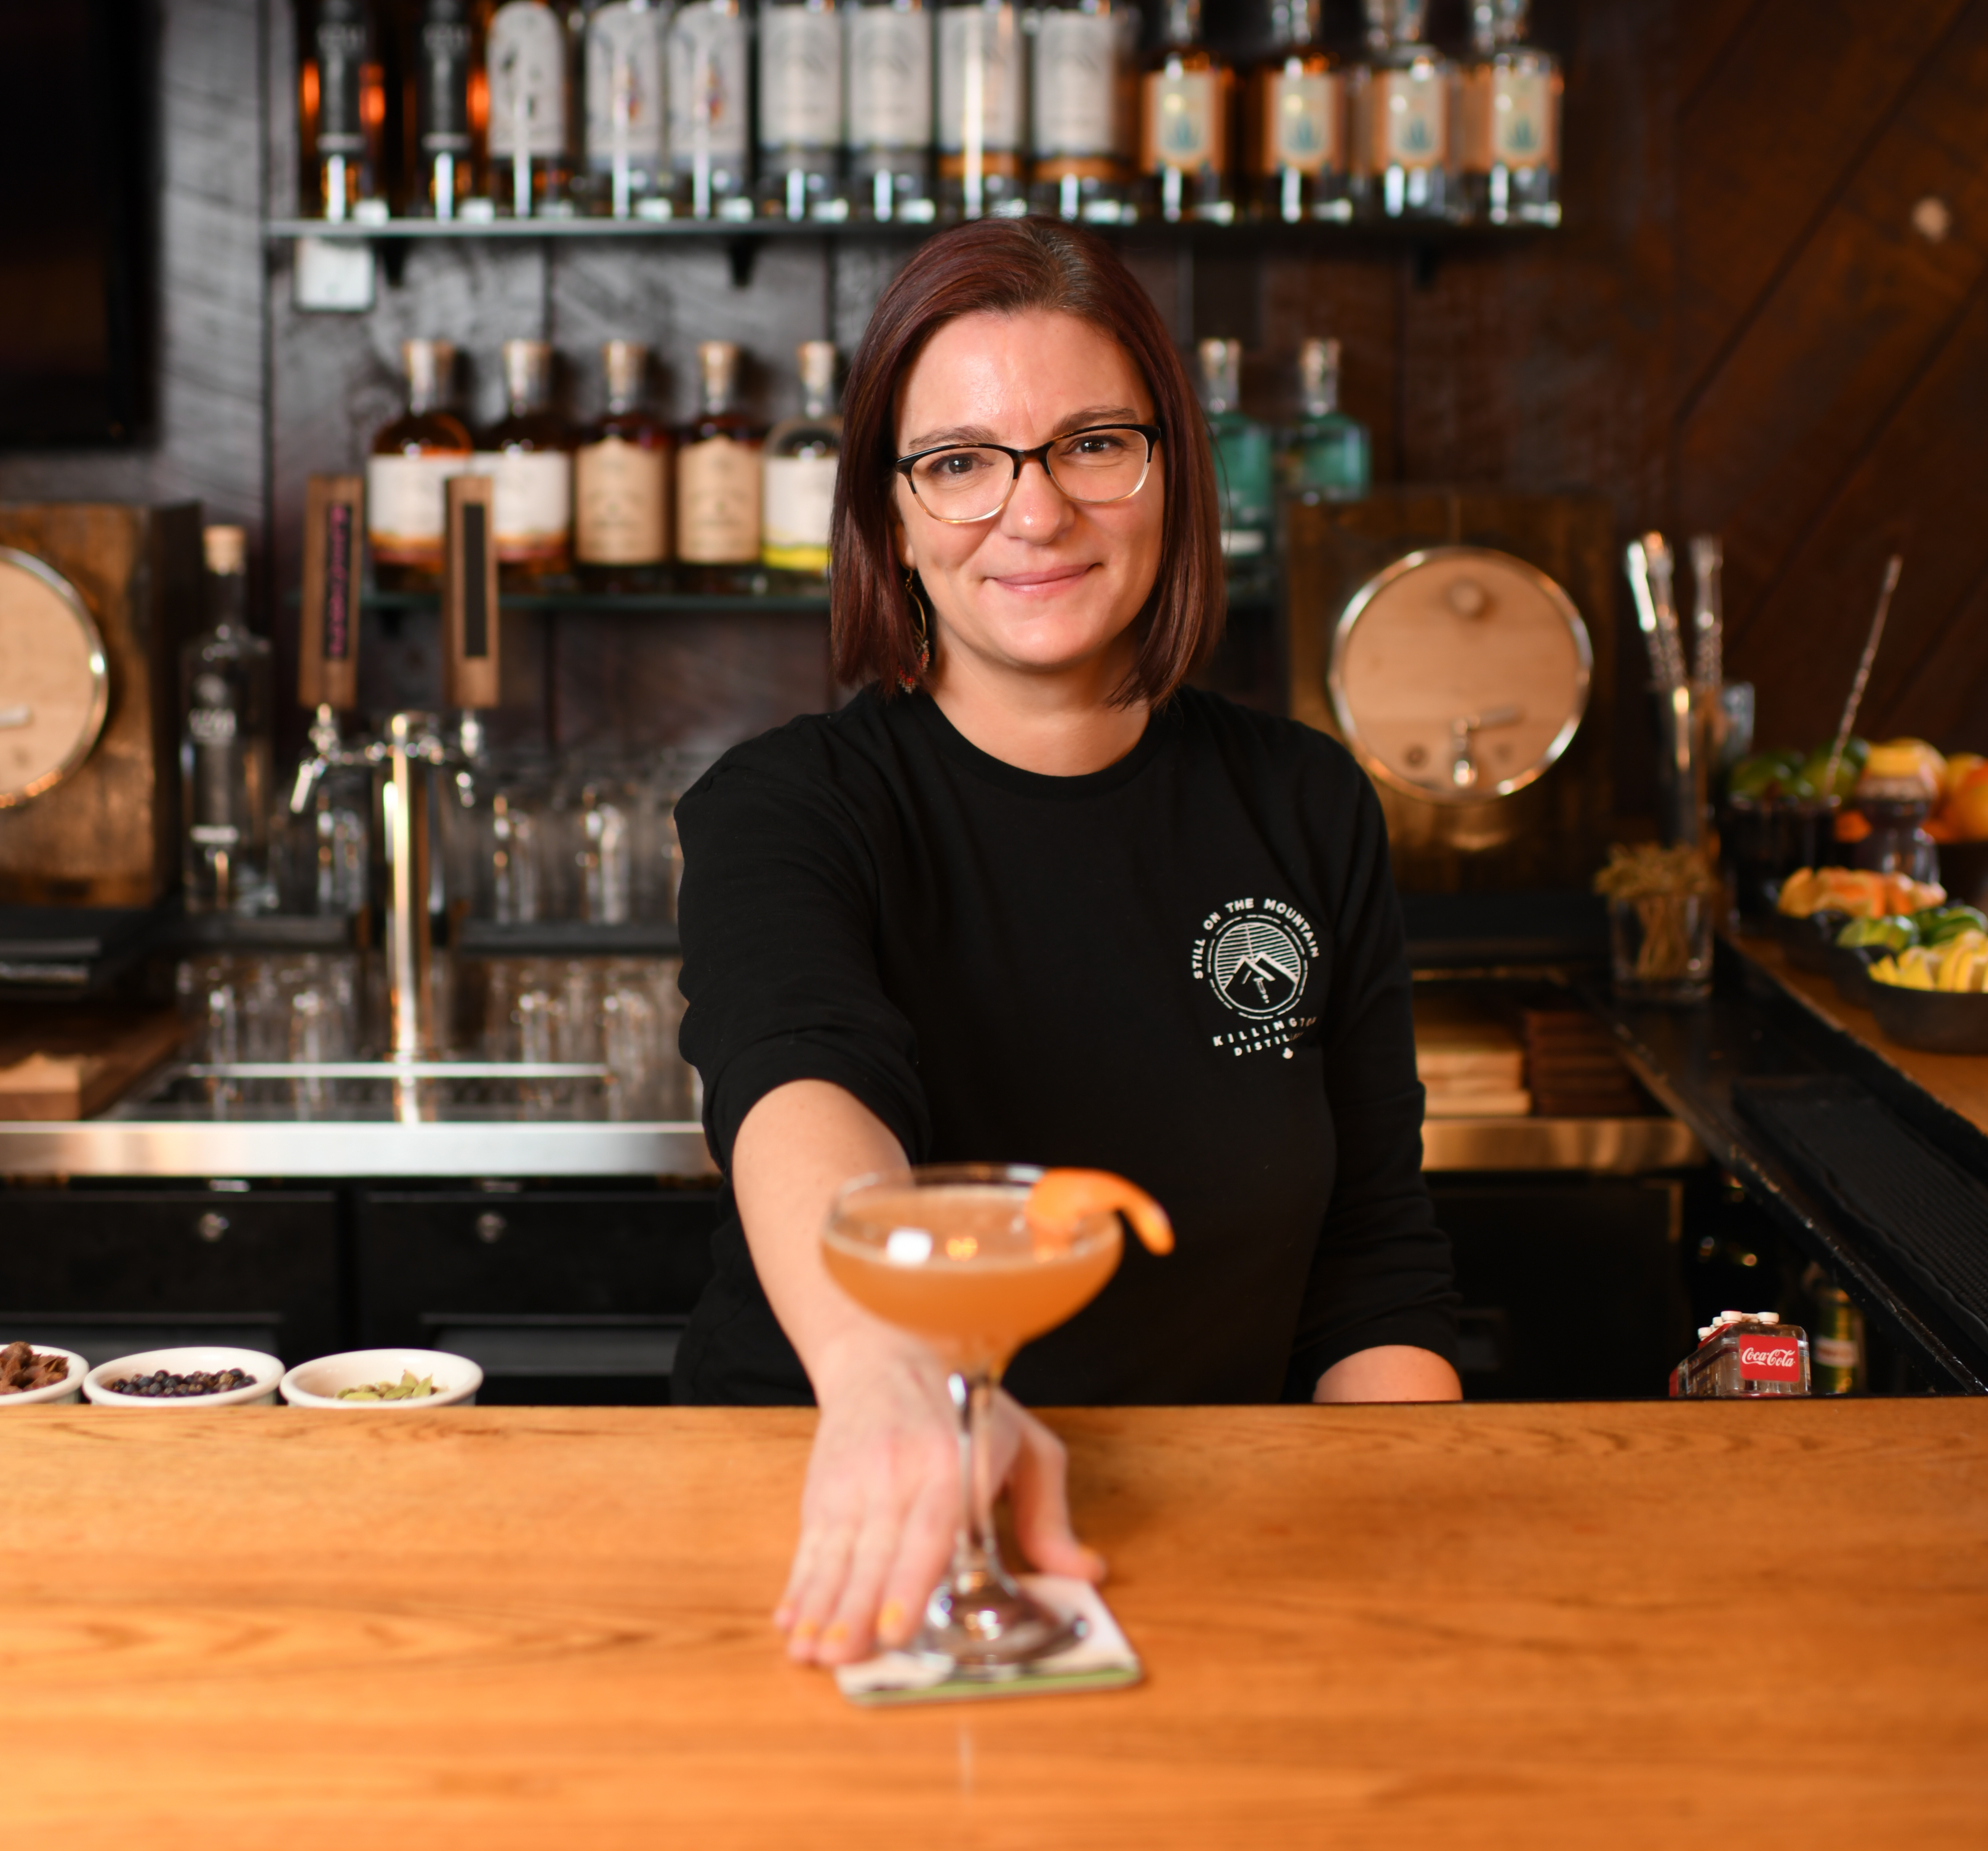 Emily Miner, Bar Manager at Killington Distillery, presents one of their signature spirits.